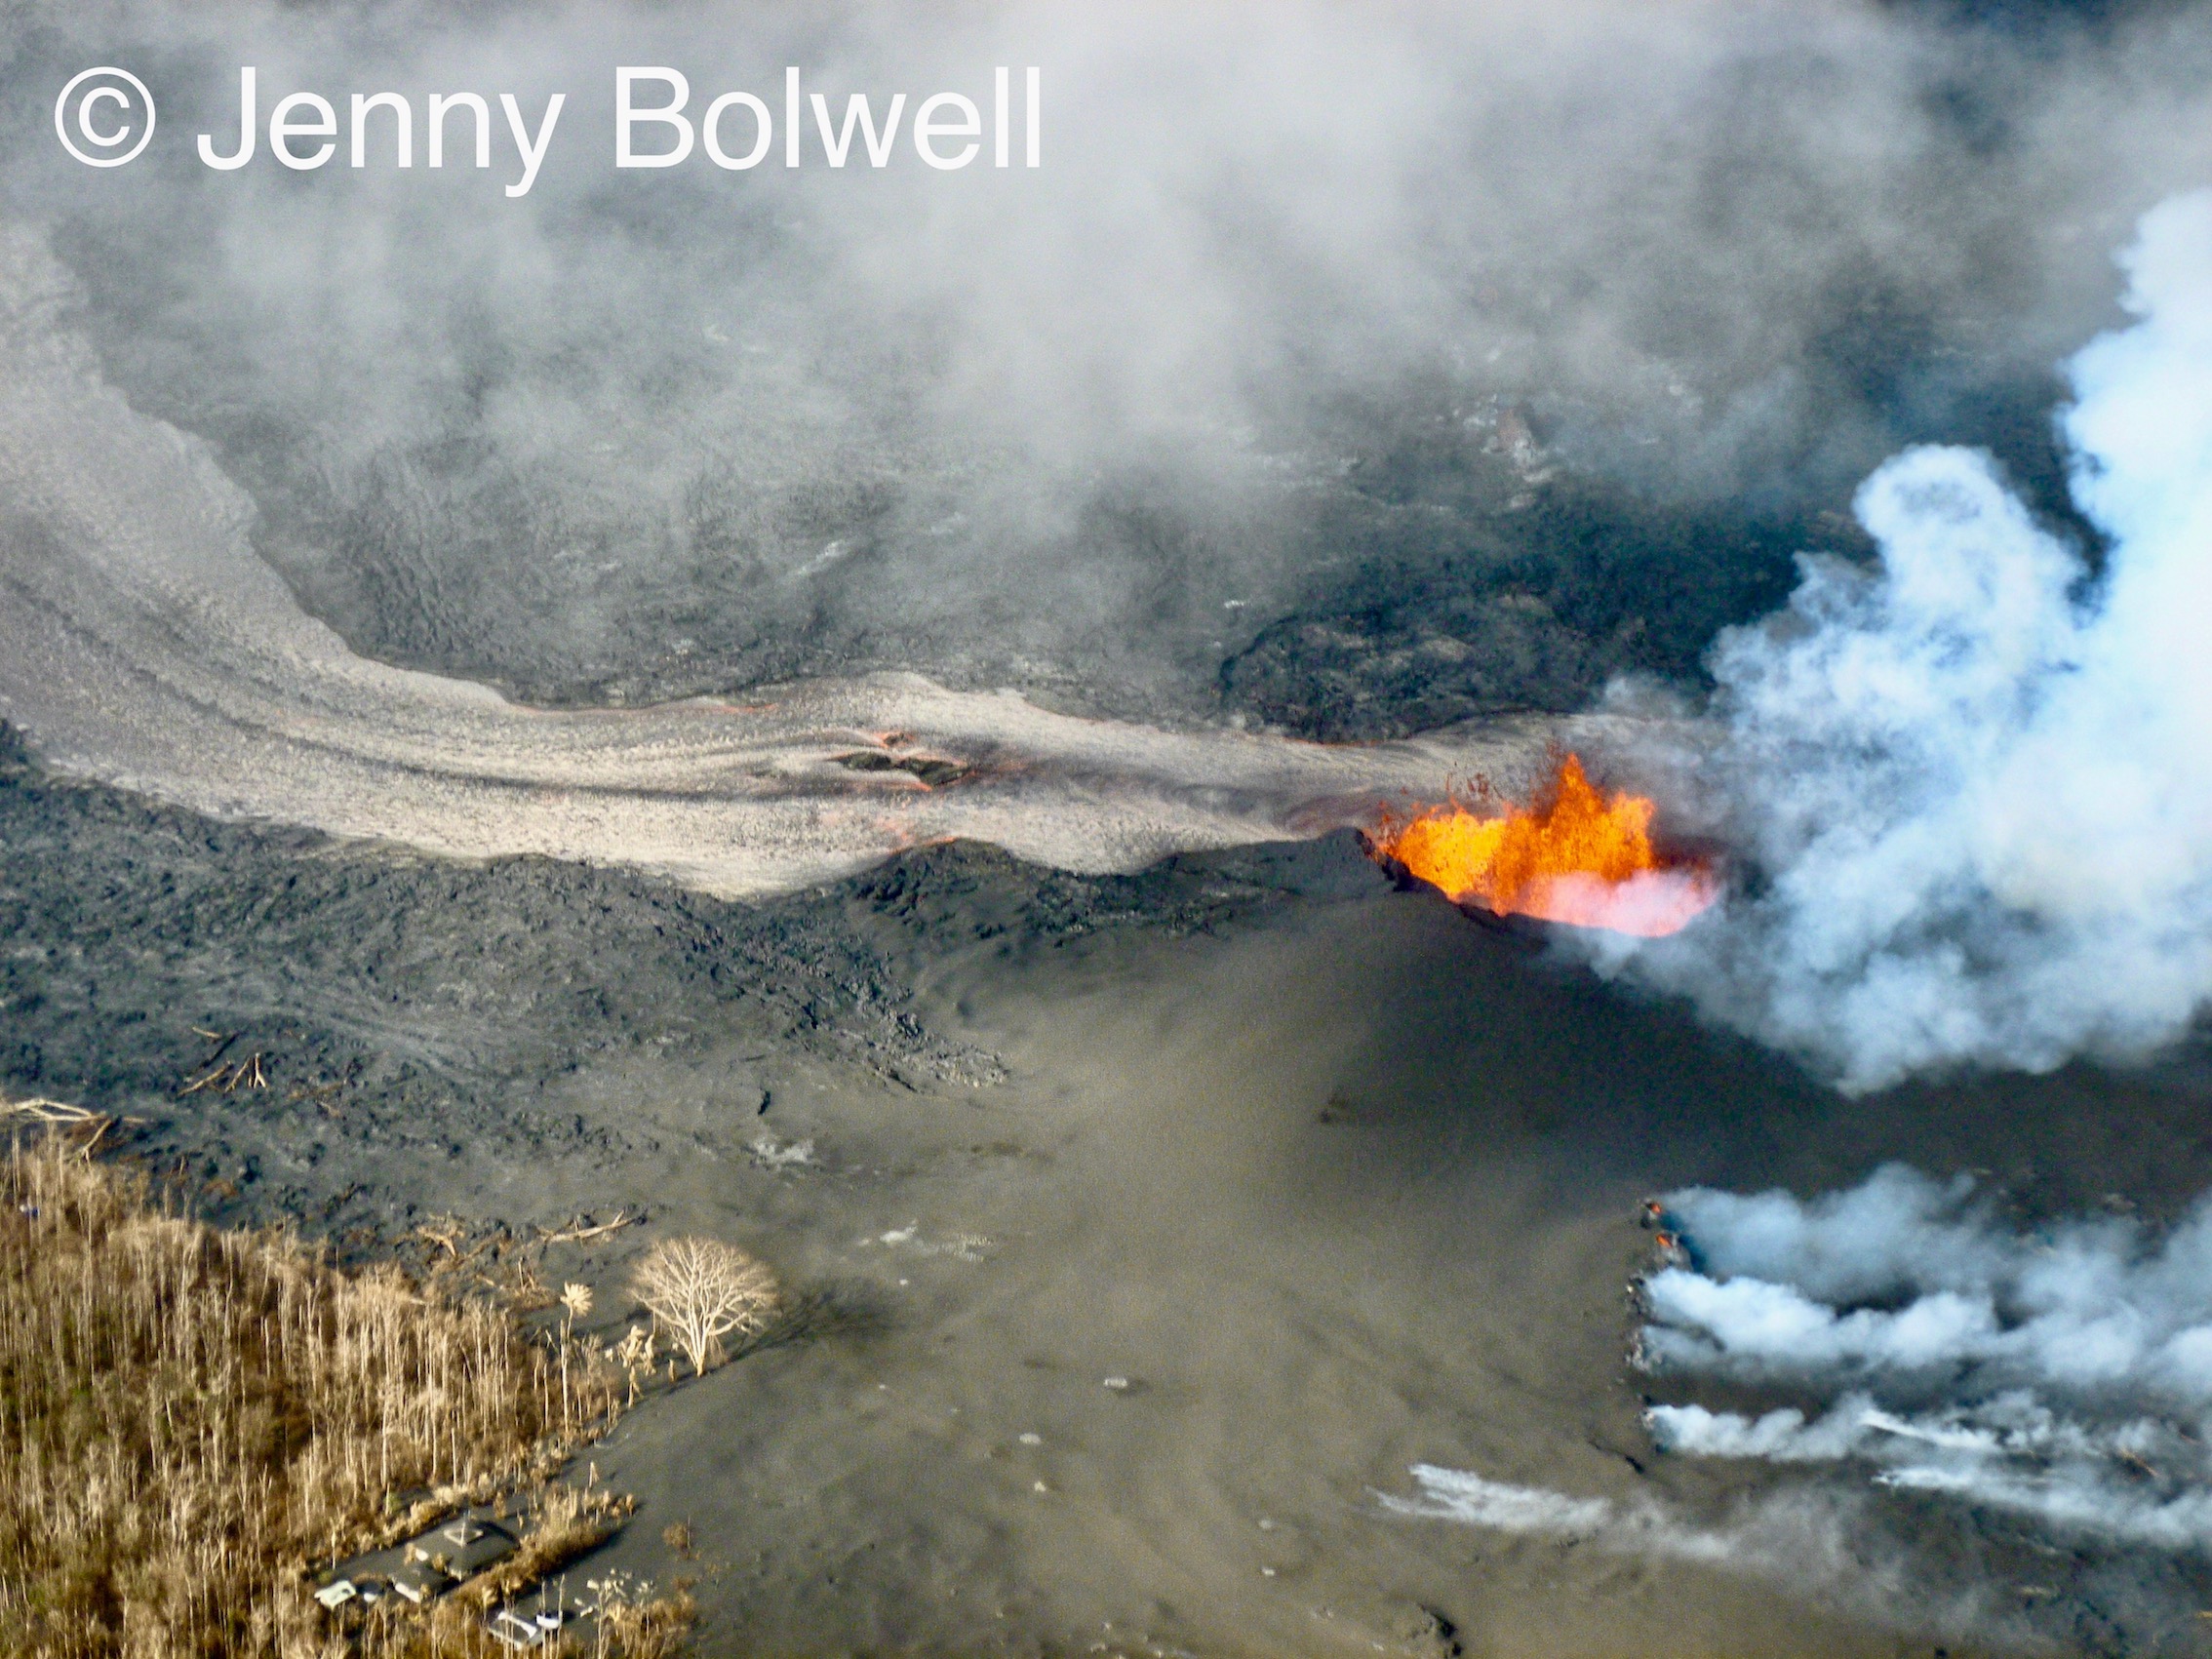 Jen's wider picture of Fissure 8 puts the lava flow into context with its surroundings.